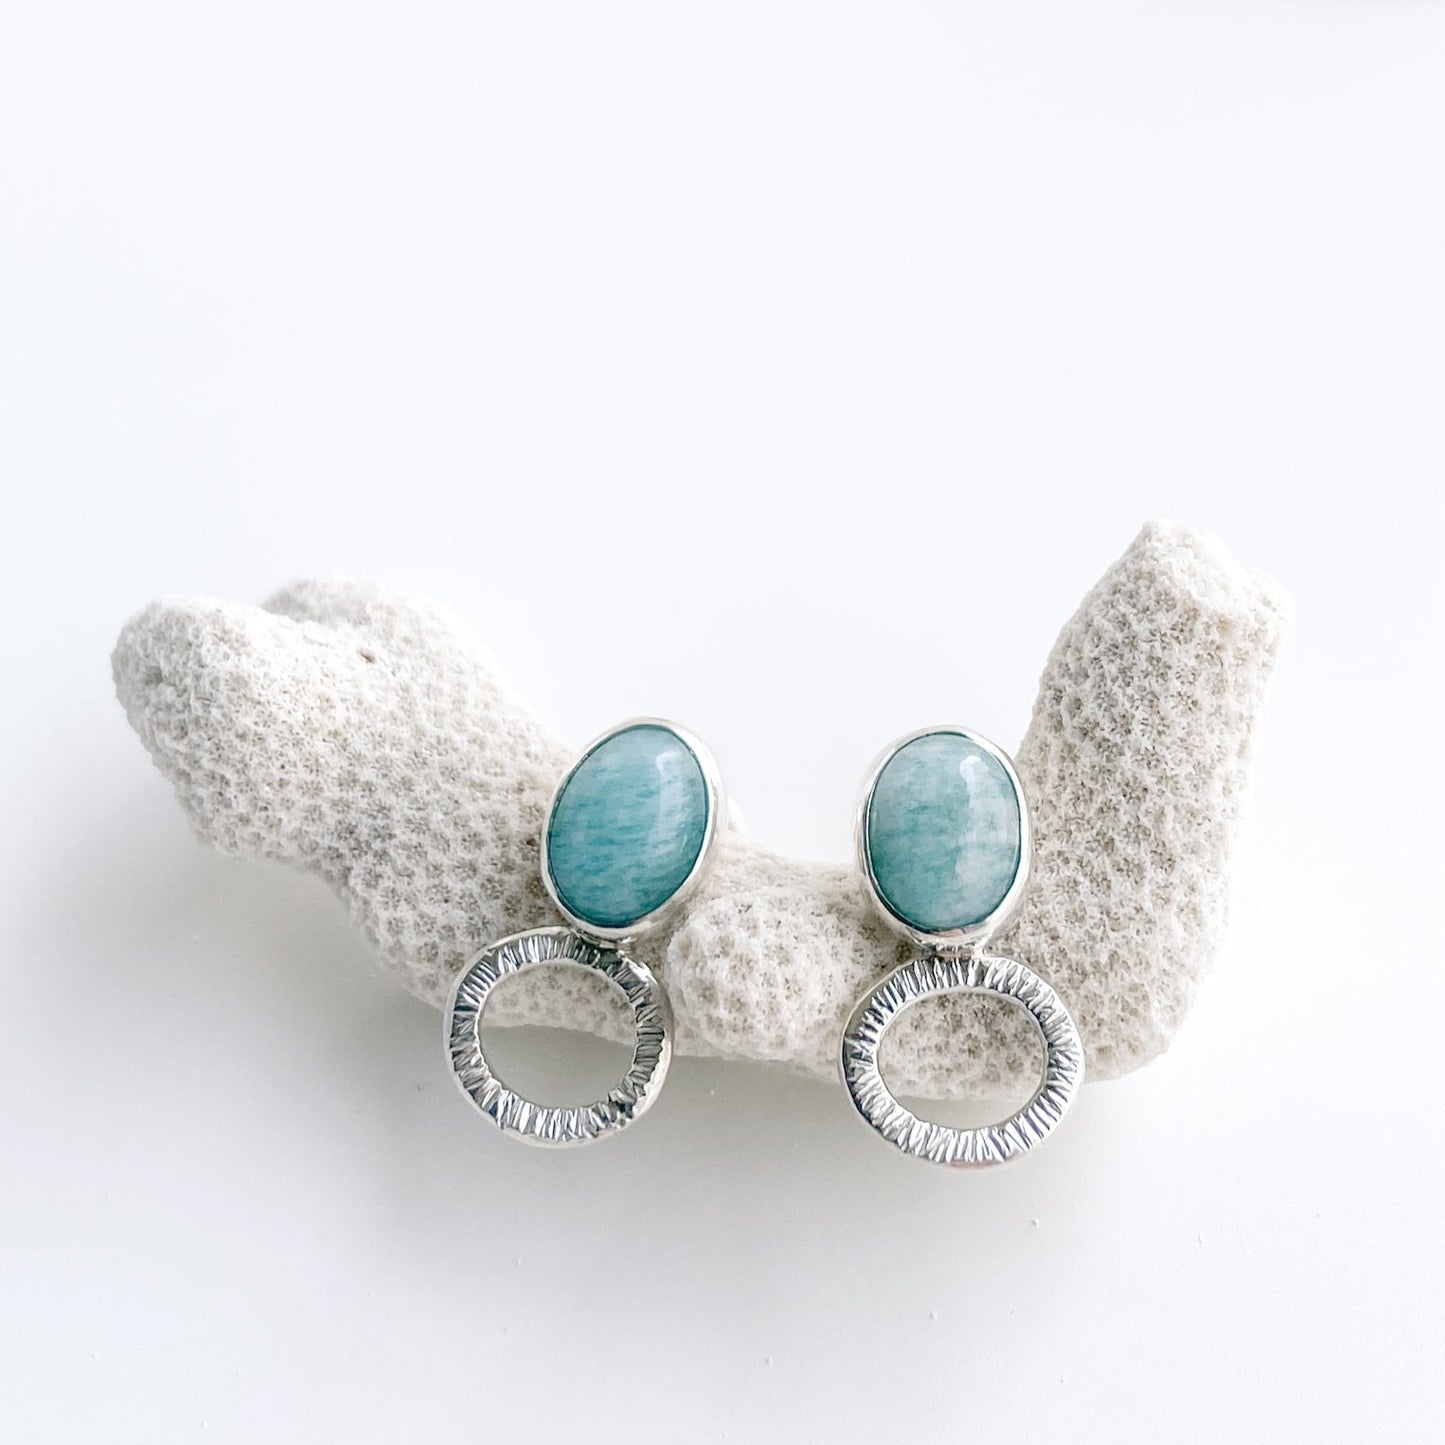 Amazonite and textured silver stud earrings displayed or a piece or white coral